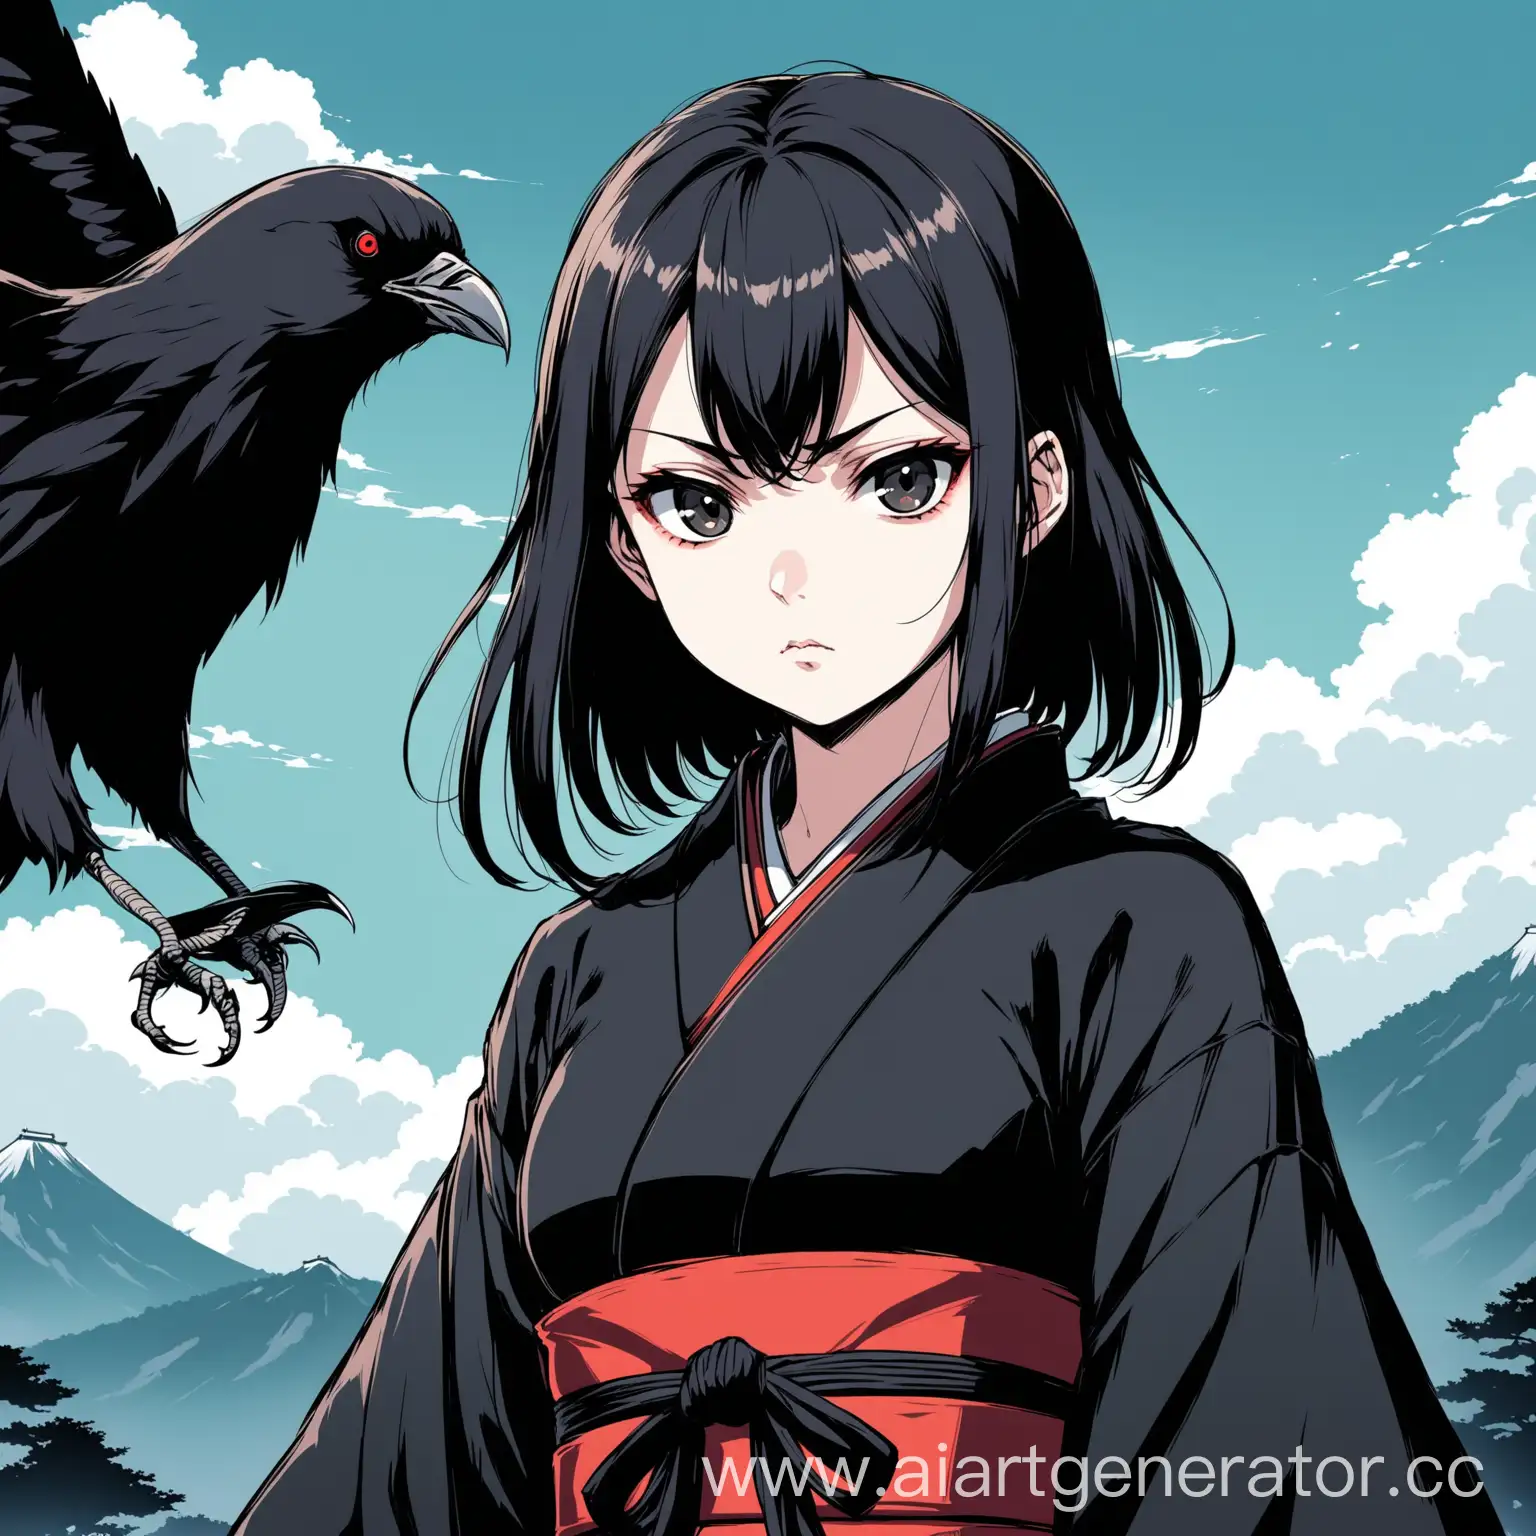 simple anime art style, one girl, middle black hair, dark eyes, pale skin, serious expression, traditional japanese outfit, the girl is a tengu, tengu, raven, sky background